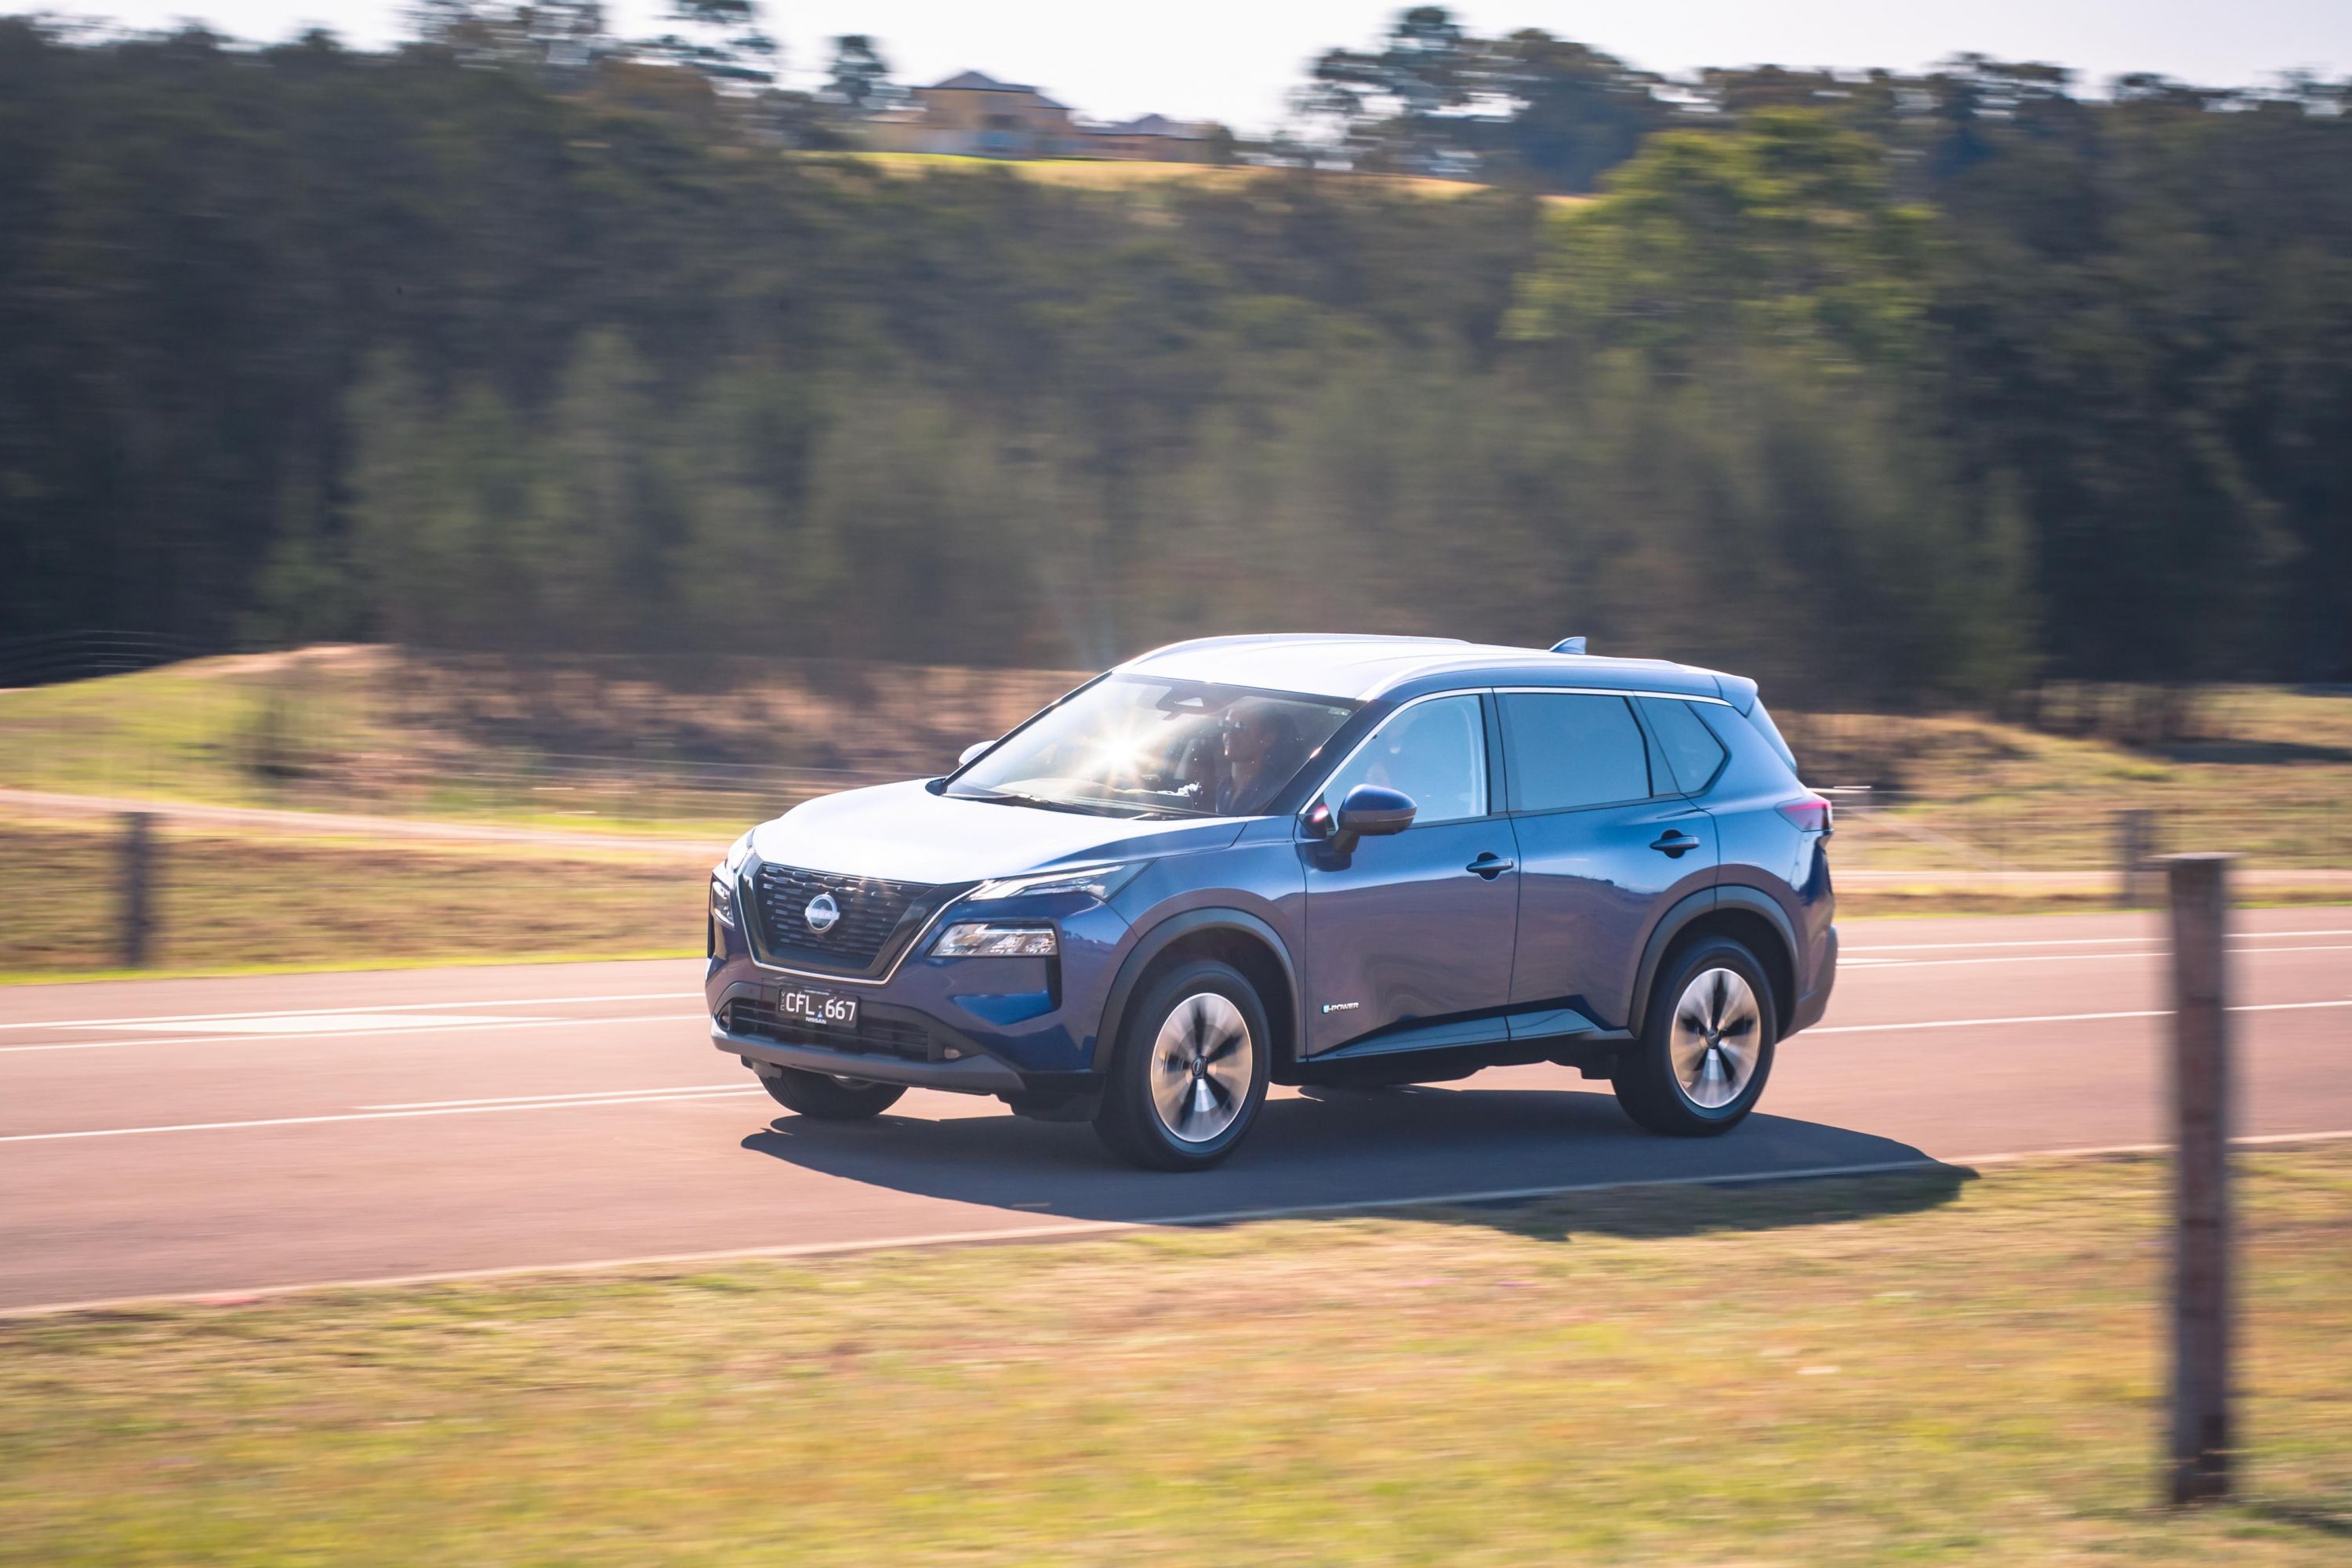 The new facelifted Nissan X-Trail can drive itself!